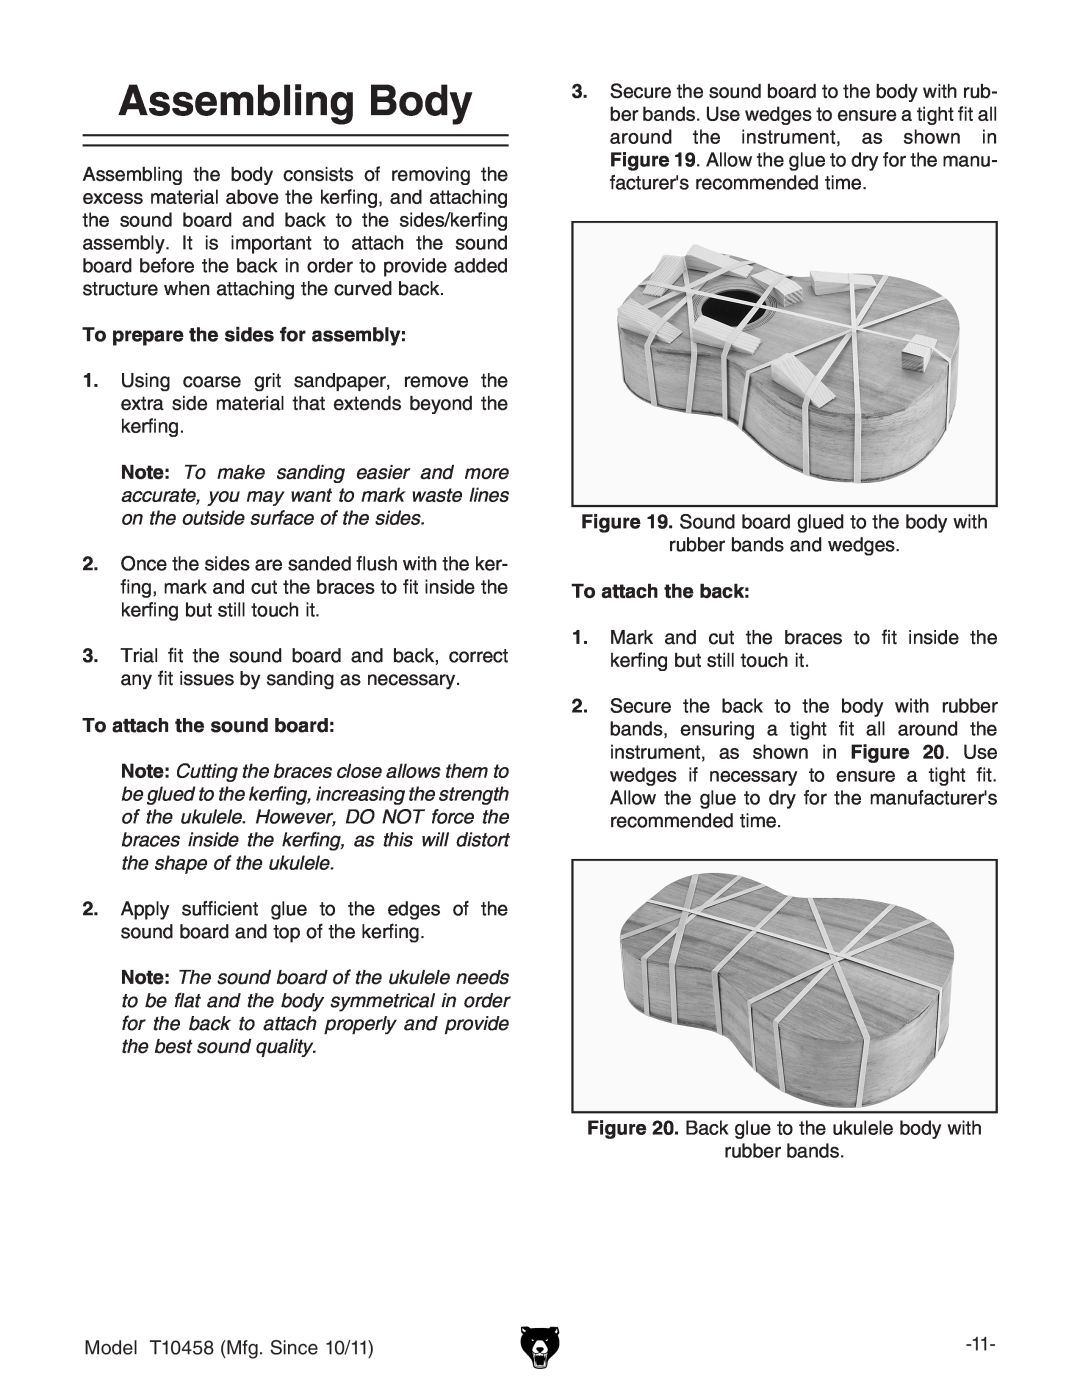 Grizzly T10458 instruction manual To attach the back 